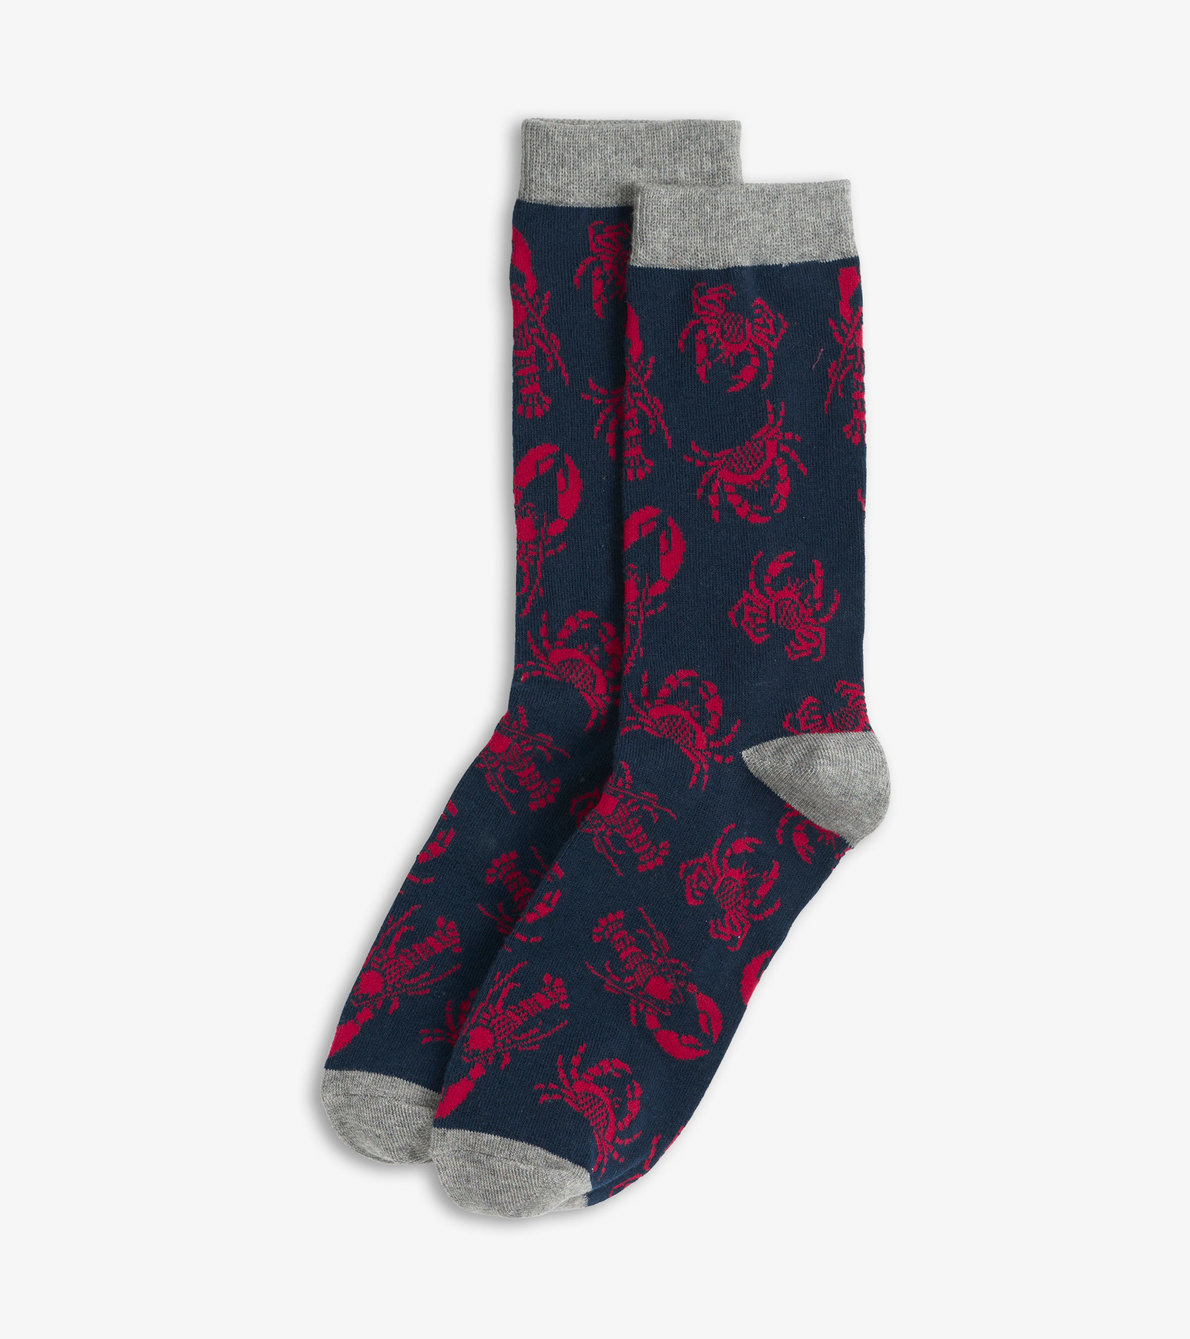 View larger image of Lobsters and Crabs Men's Crew Socks